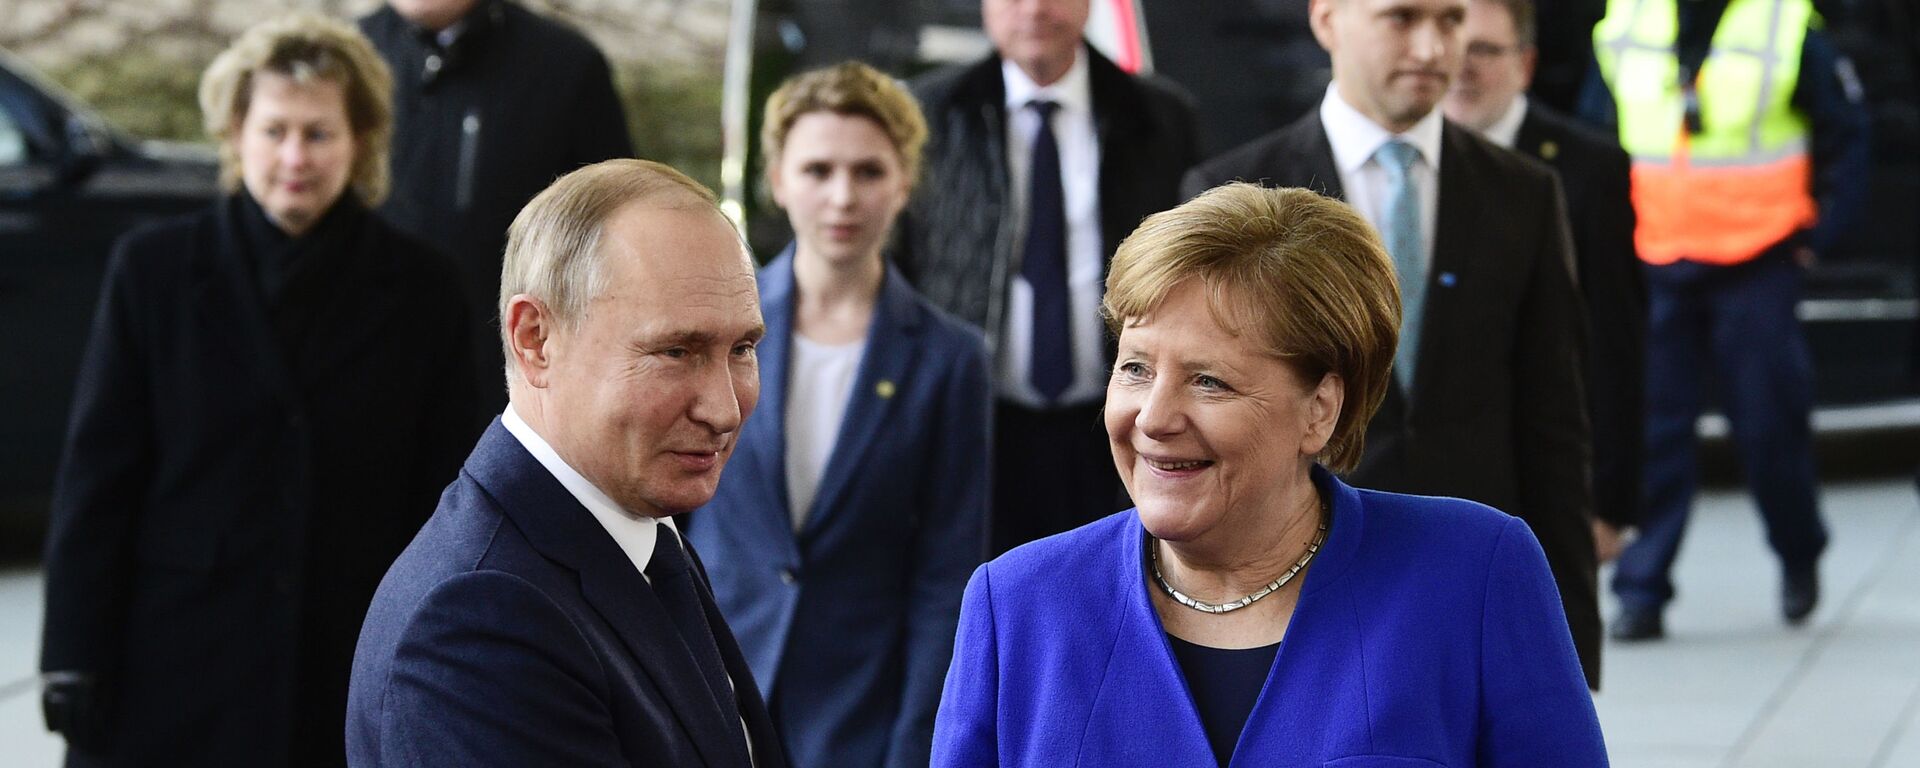 German Chancellor Angela Merkel, right, shakes hands with Russian President Vladimir Putin during arrivals for a conference on Libya at the chancellery in Berlin, Germany, Sunday, Jan. 19, 2020 - Sputnik International, 1920, 24.06.2021